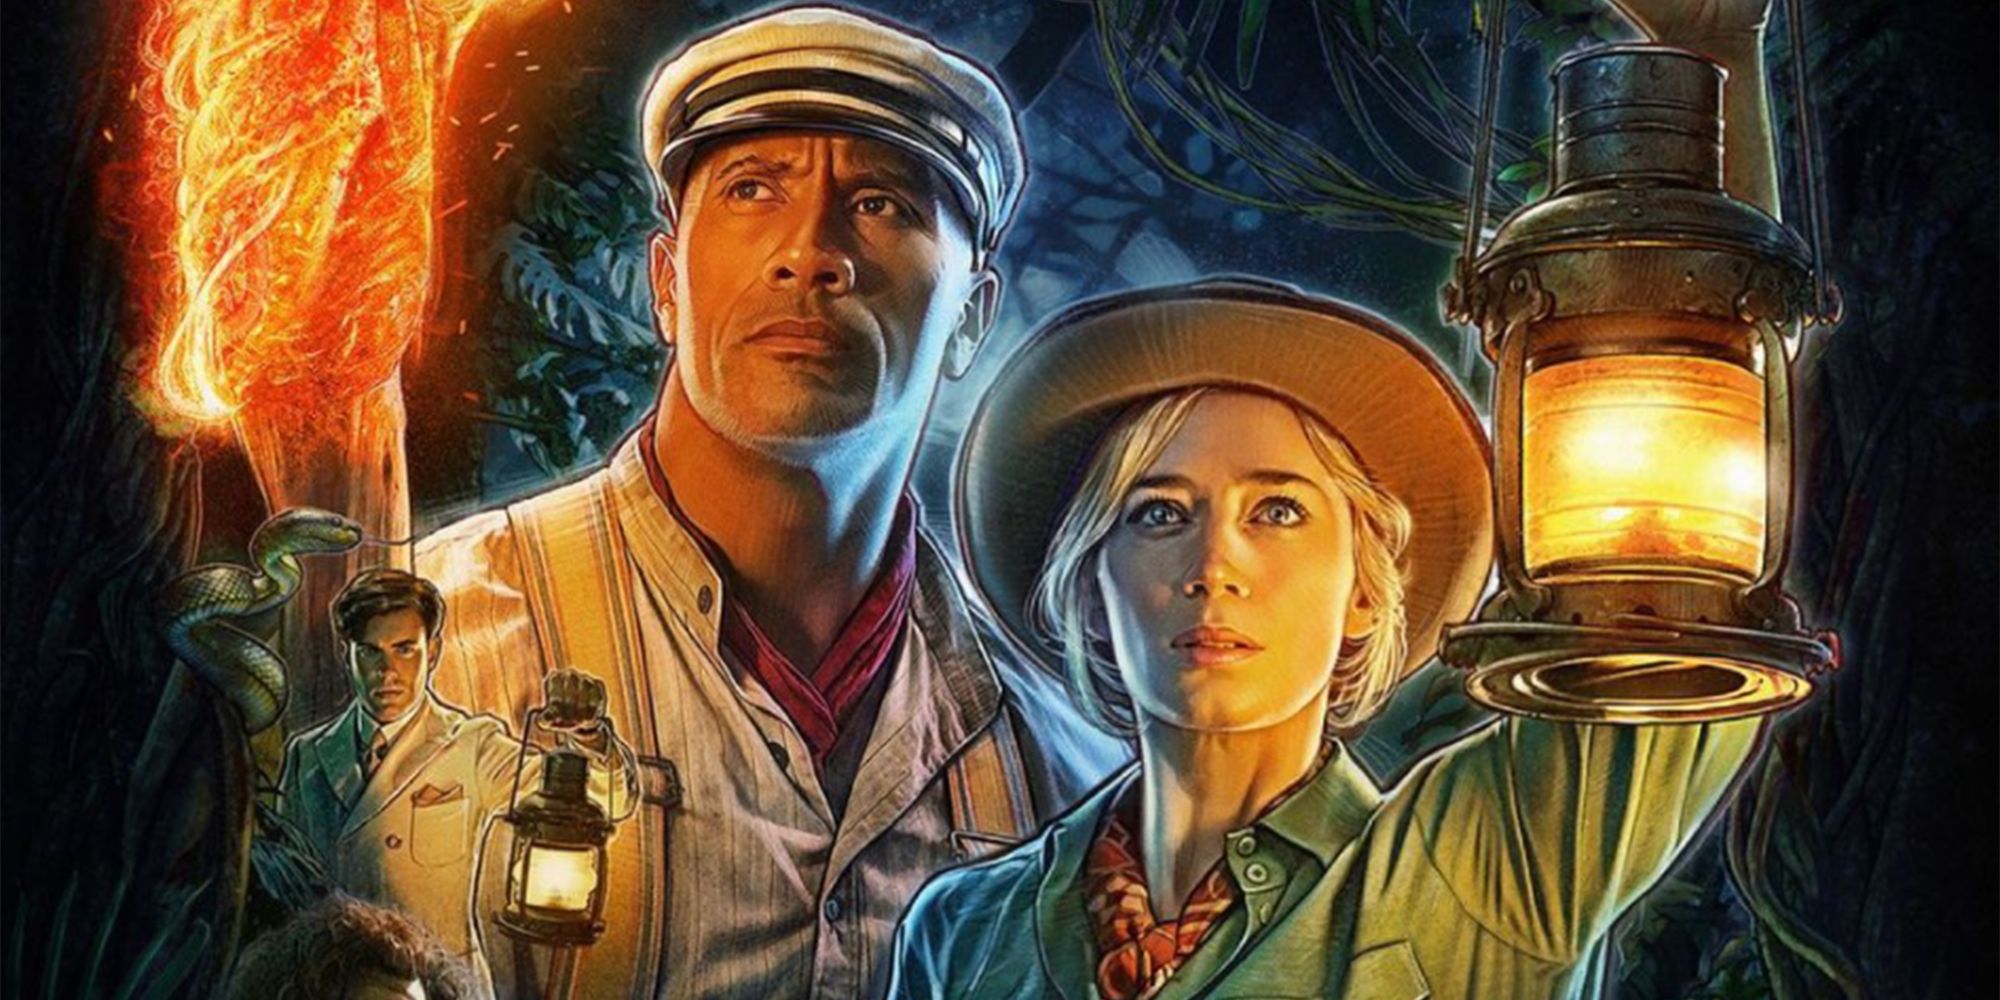 Jungle Cruise 2 In The Works With Dwayne Johnson & Emily Blunt Returning